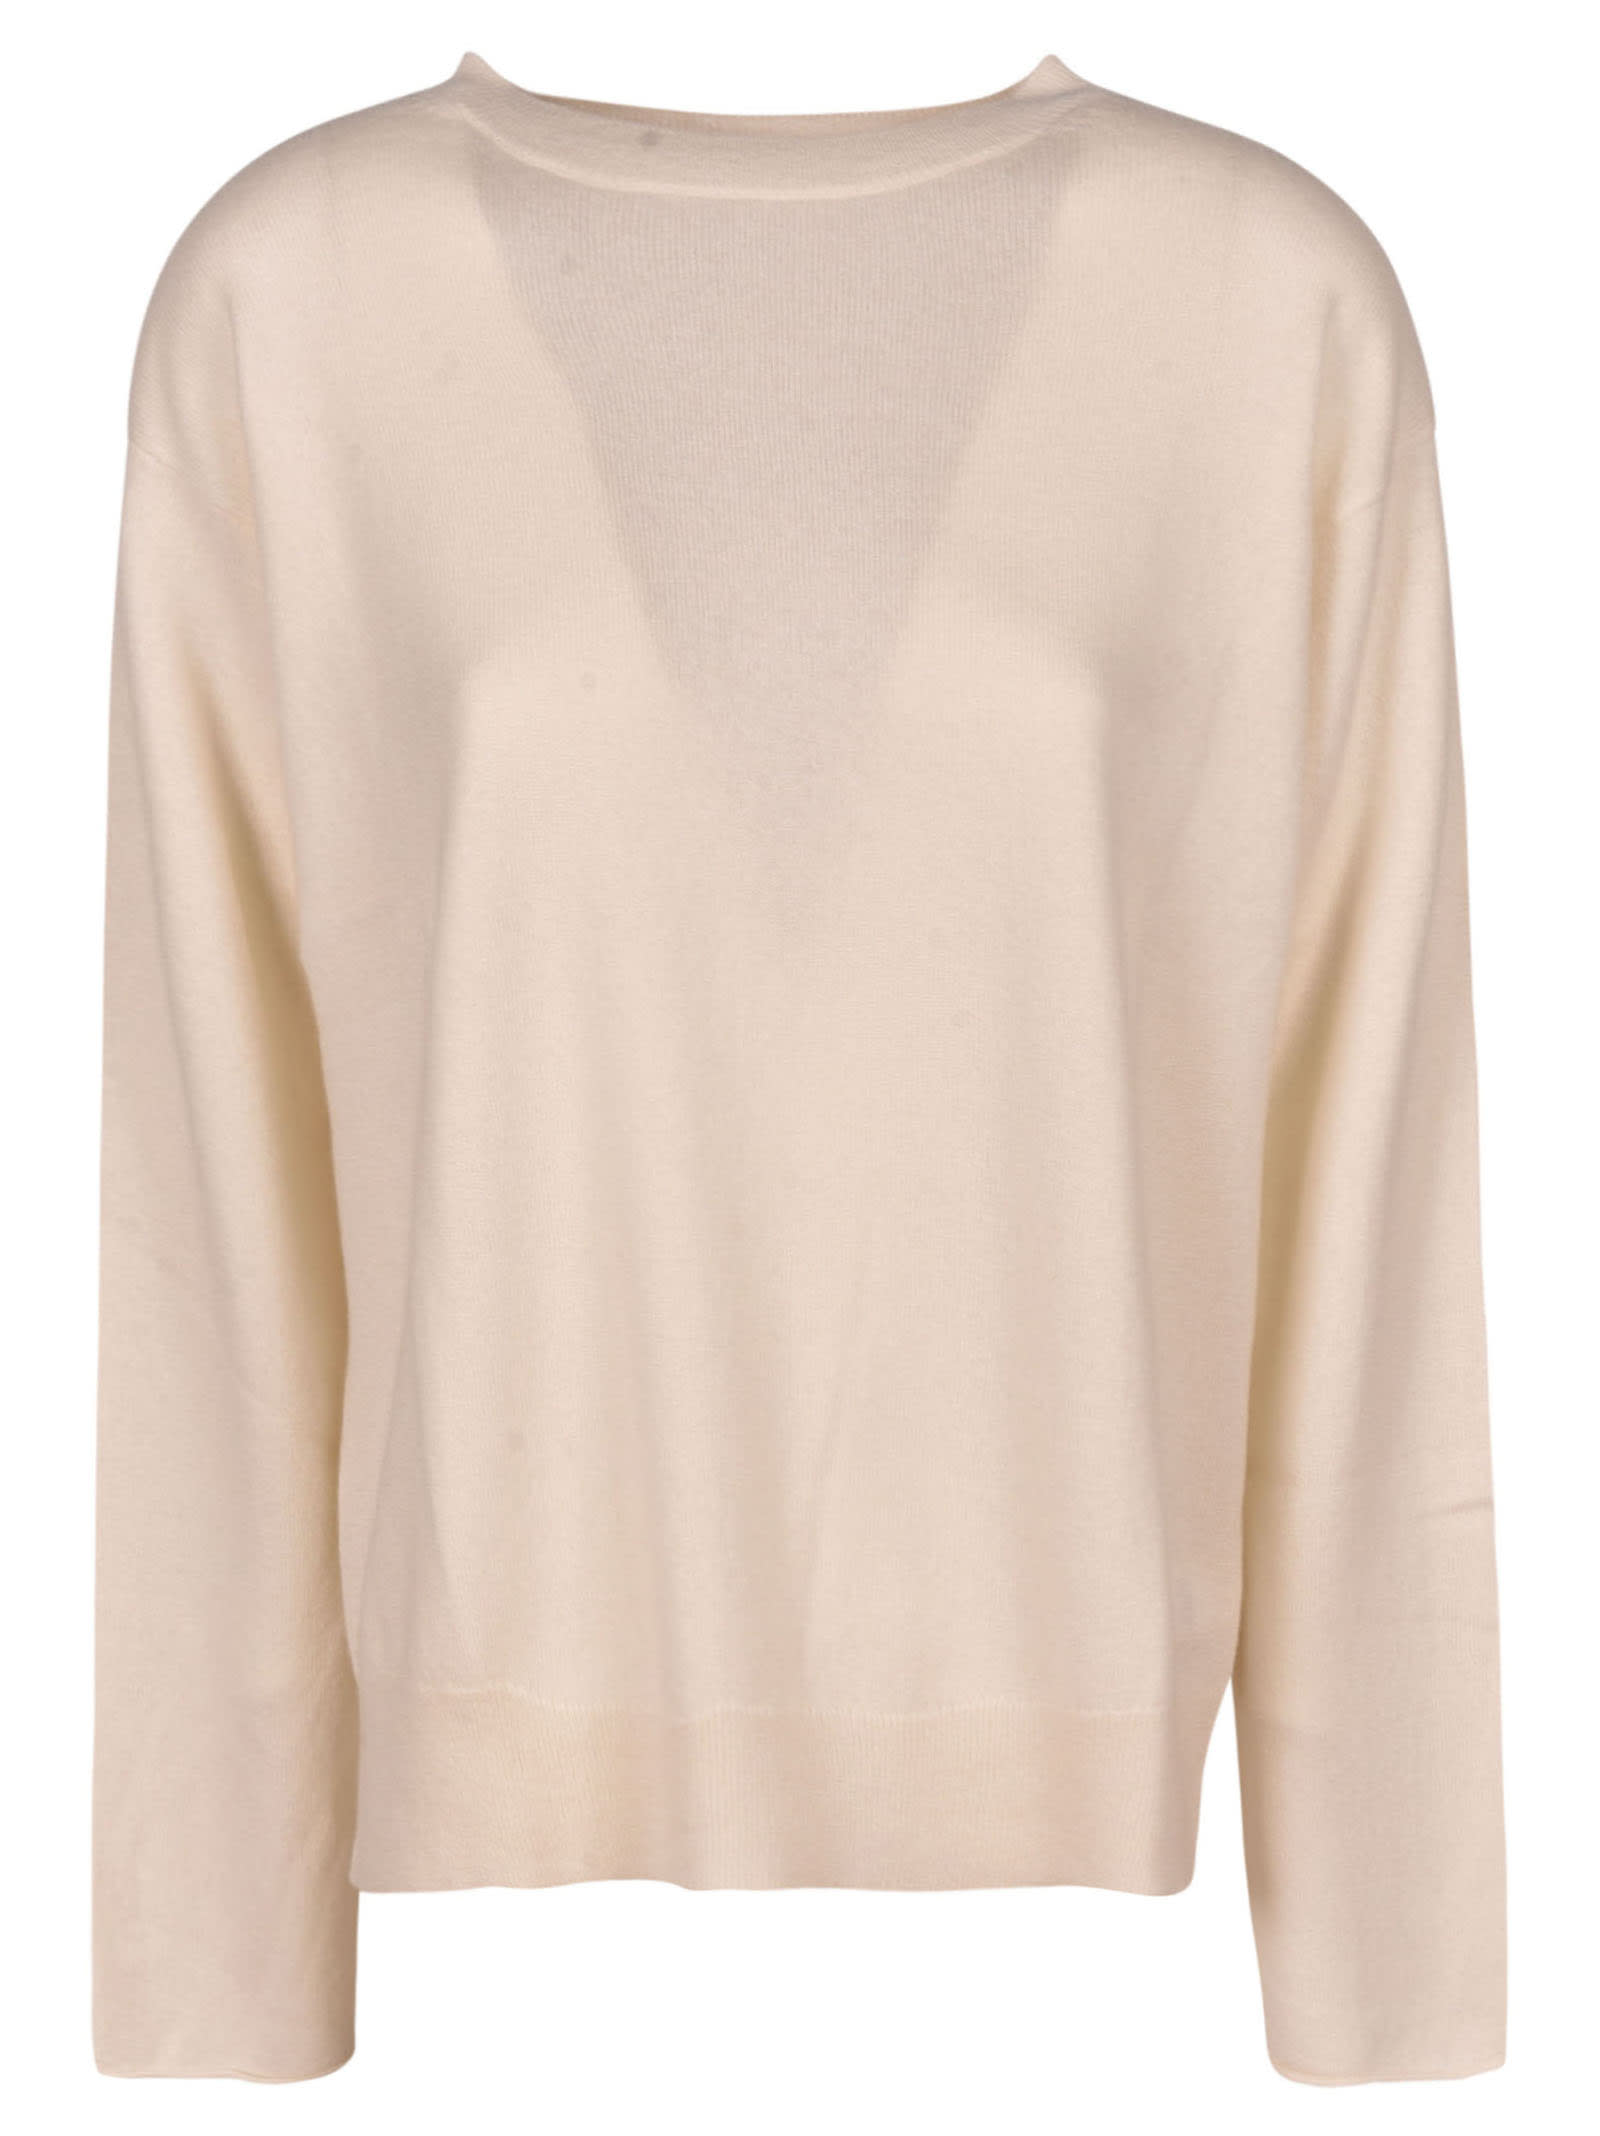 Sofie dHoore Mistral Sweater